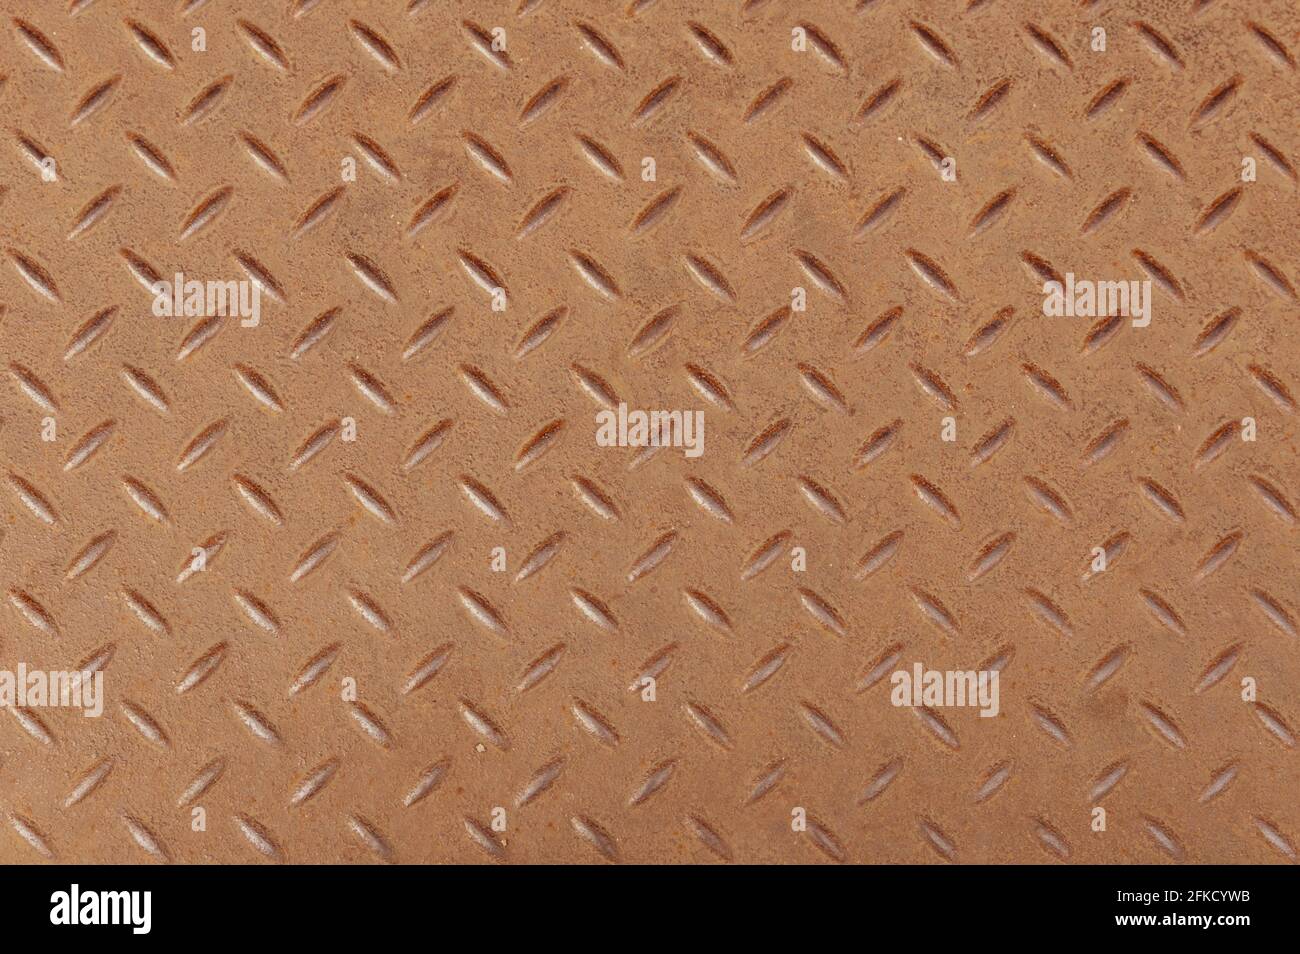 Top view of Slightly rusted steel diamond pattern sheet as background. Stock Photo